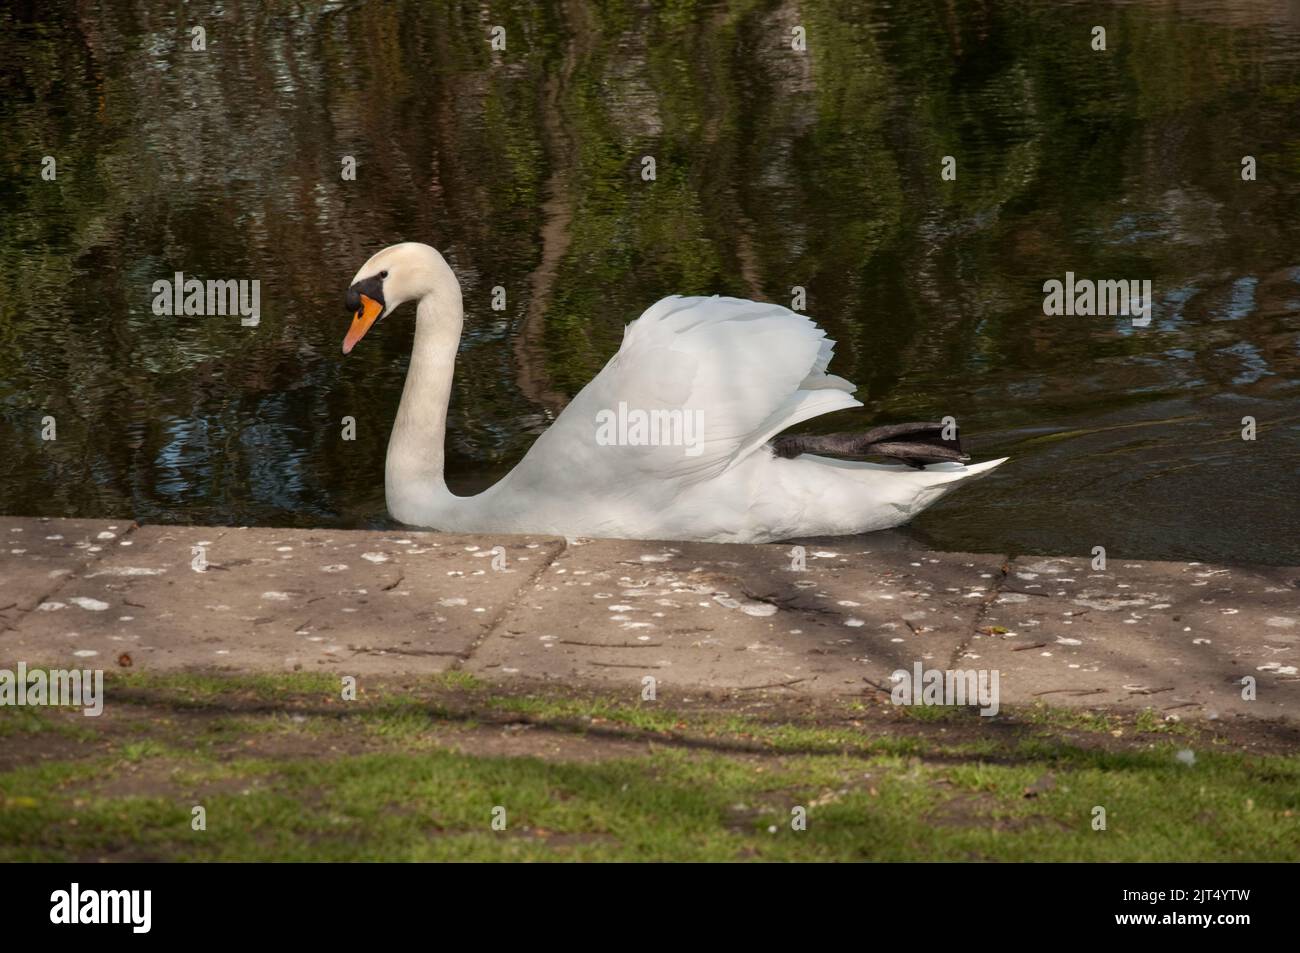 Swan on Lake, St Stephen's Green, Dublin, Eire.  St Stephen's Green is a public park in Central Dublin, with large areas for walking and enjoying the Stock Photo